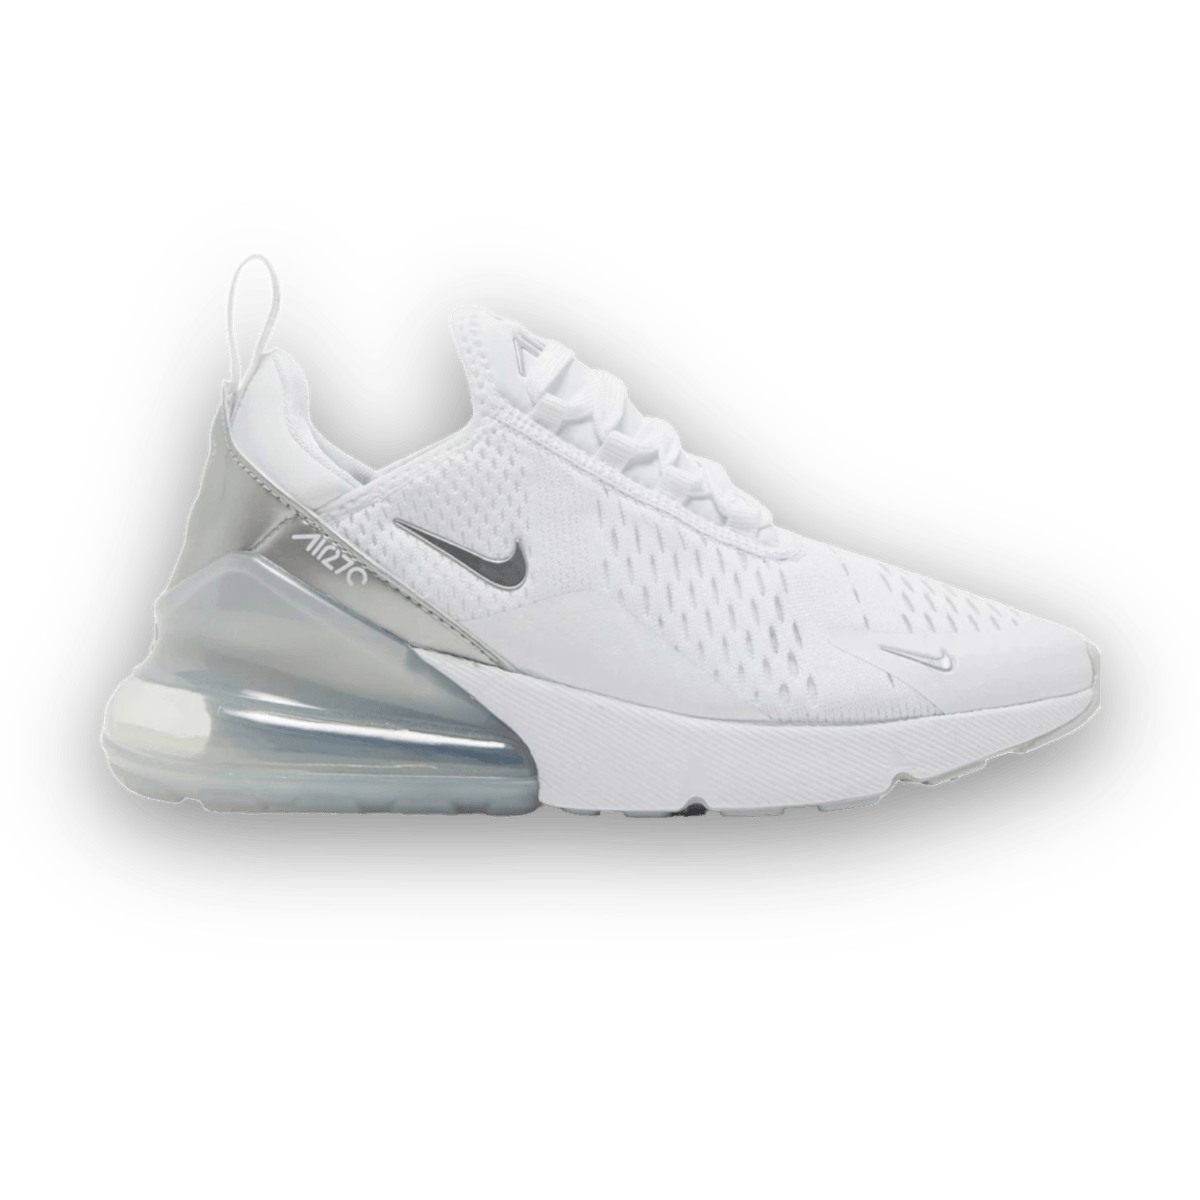 Air Max 270 White - Toddler - Low Sneaker - Jawns on Fire Sneakers & Streetwear